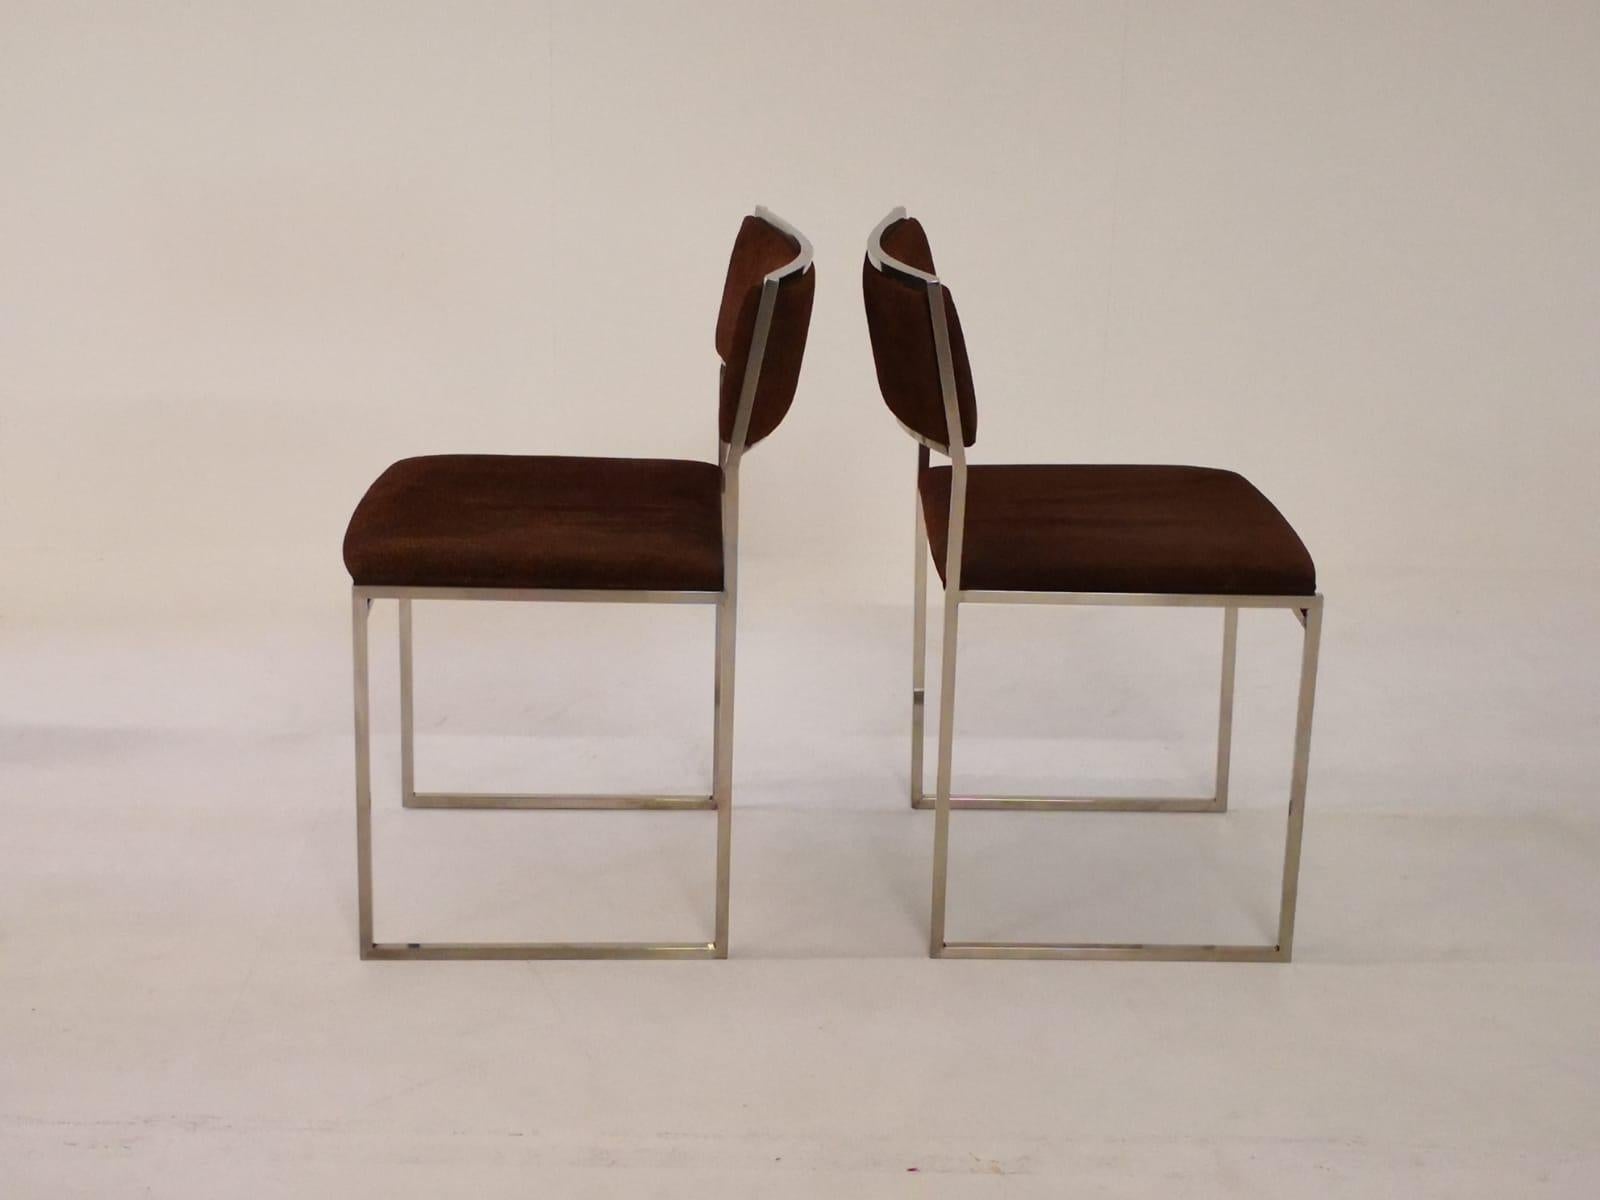 Late 20th Century Mid-Century Modern Italian Set of 4 Chairs by Willy Rizzo, 1970s